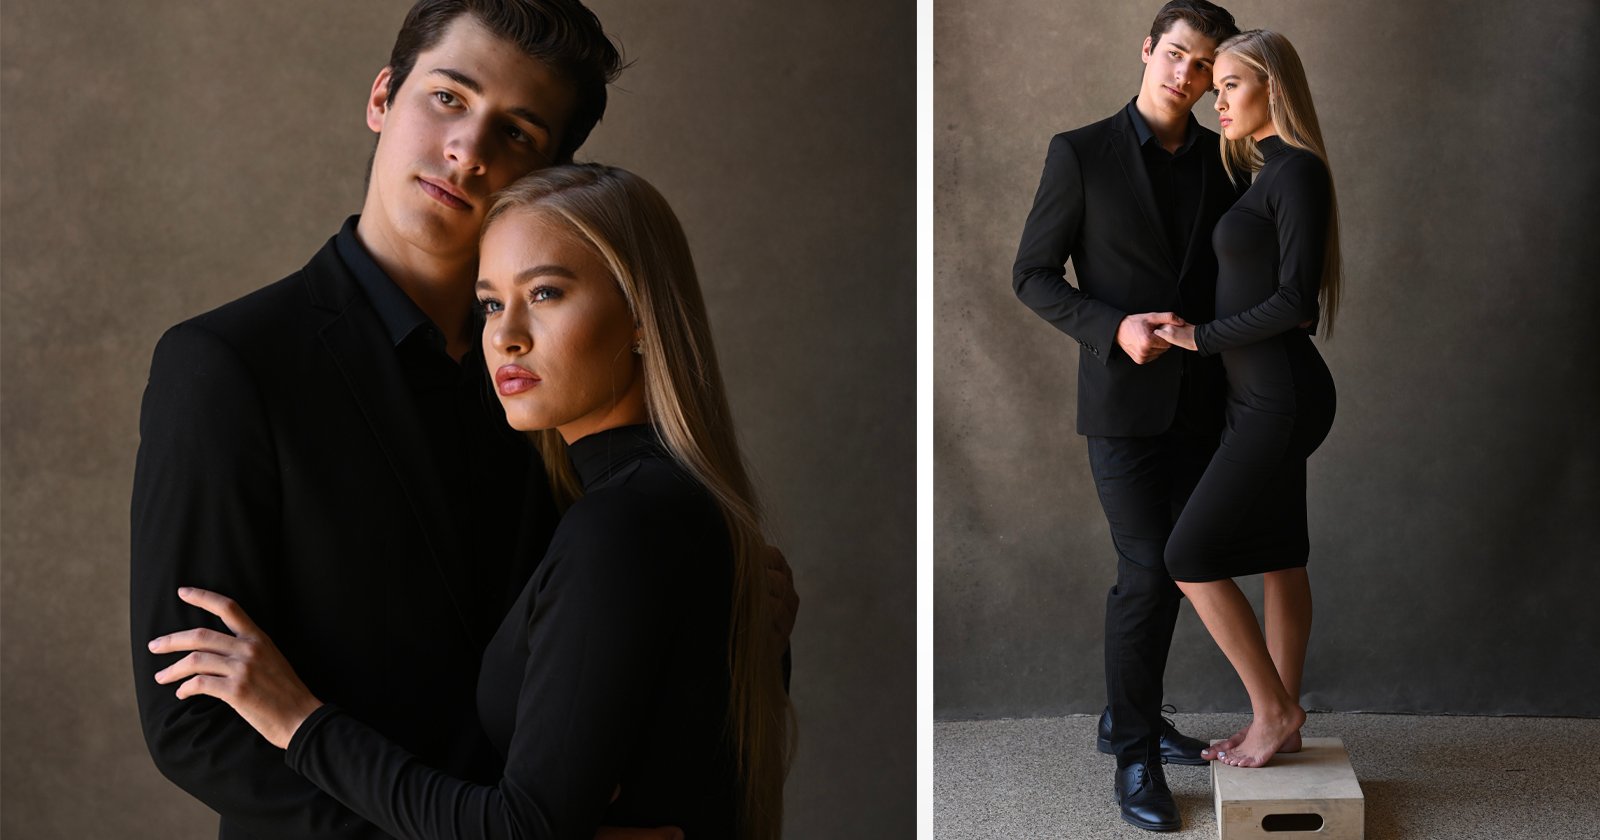 Spread 'em - A top tip for photographing tall & short couples